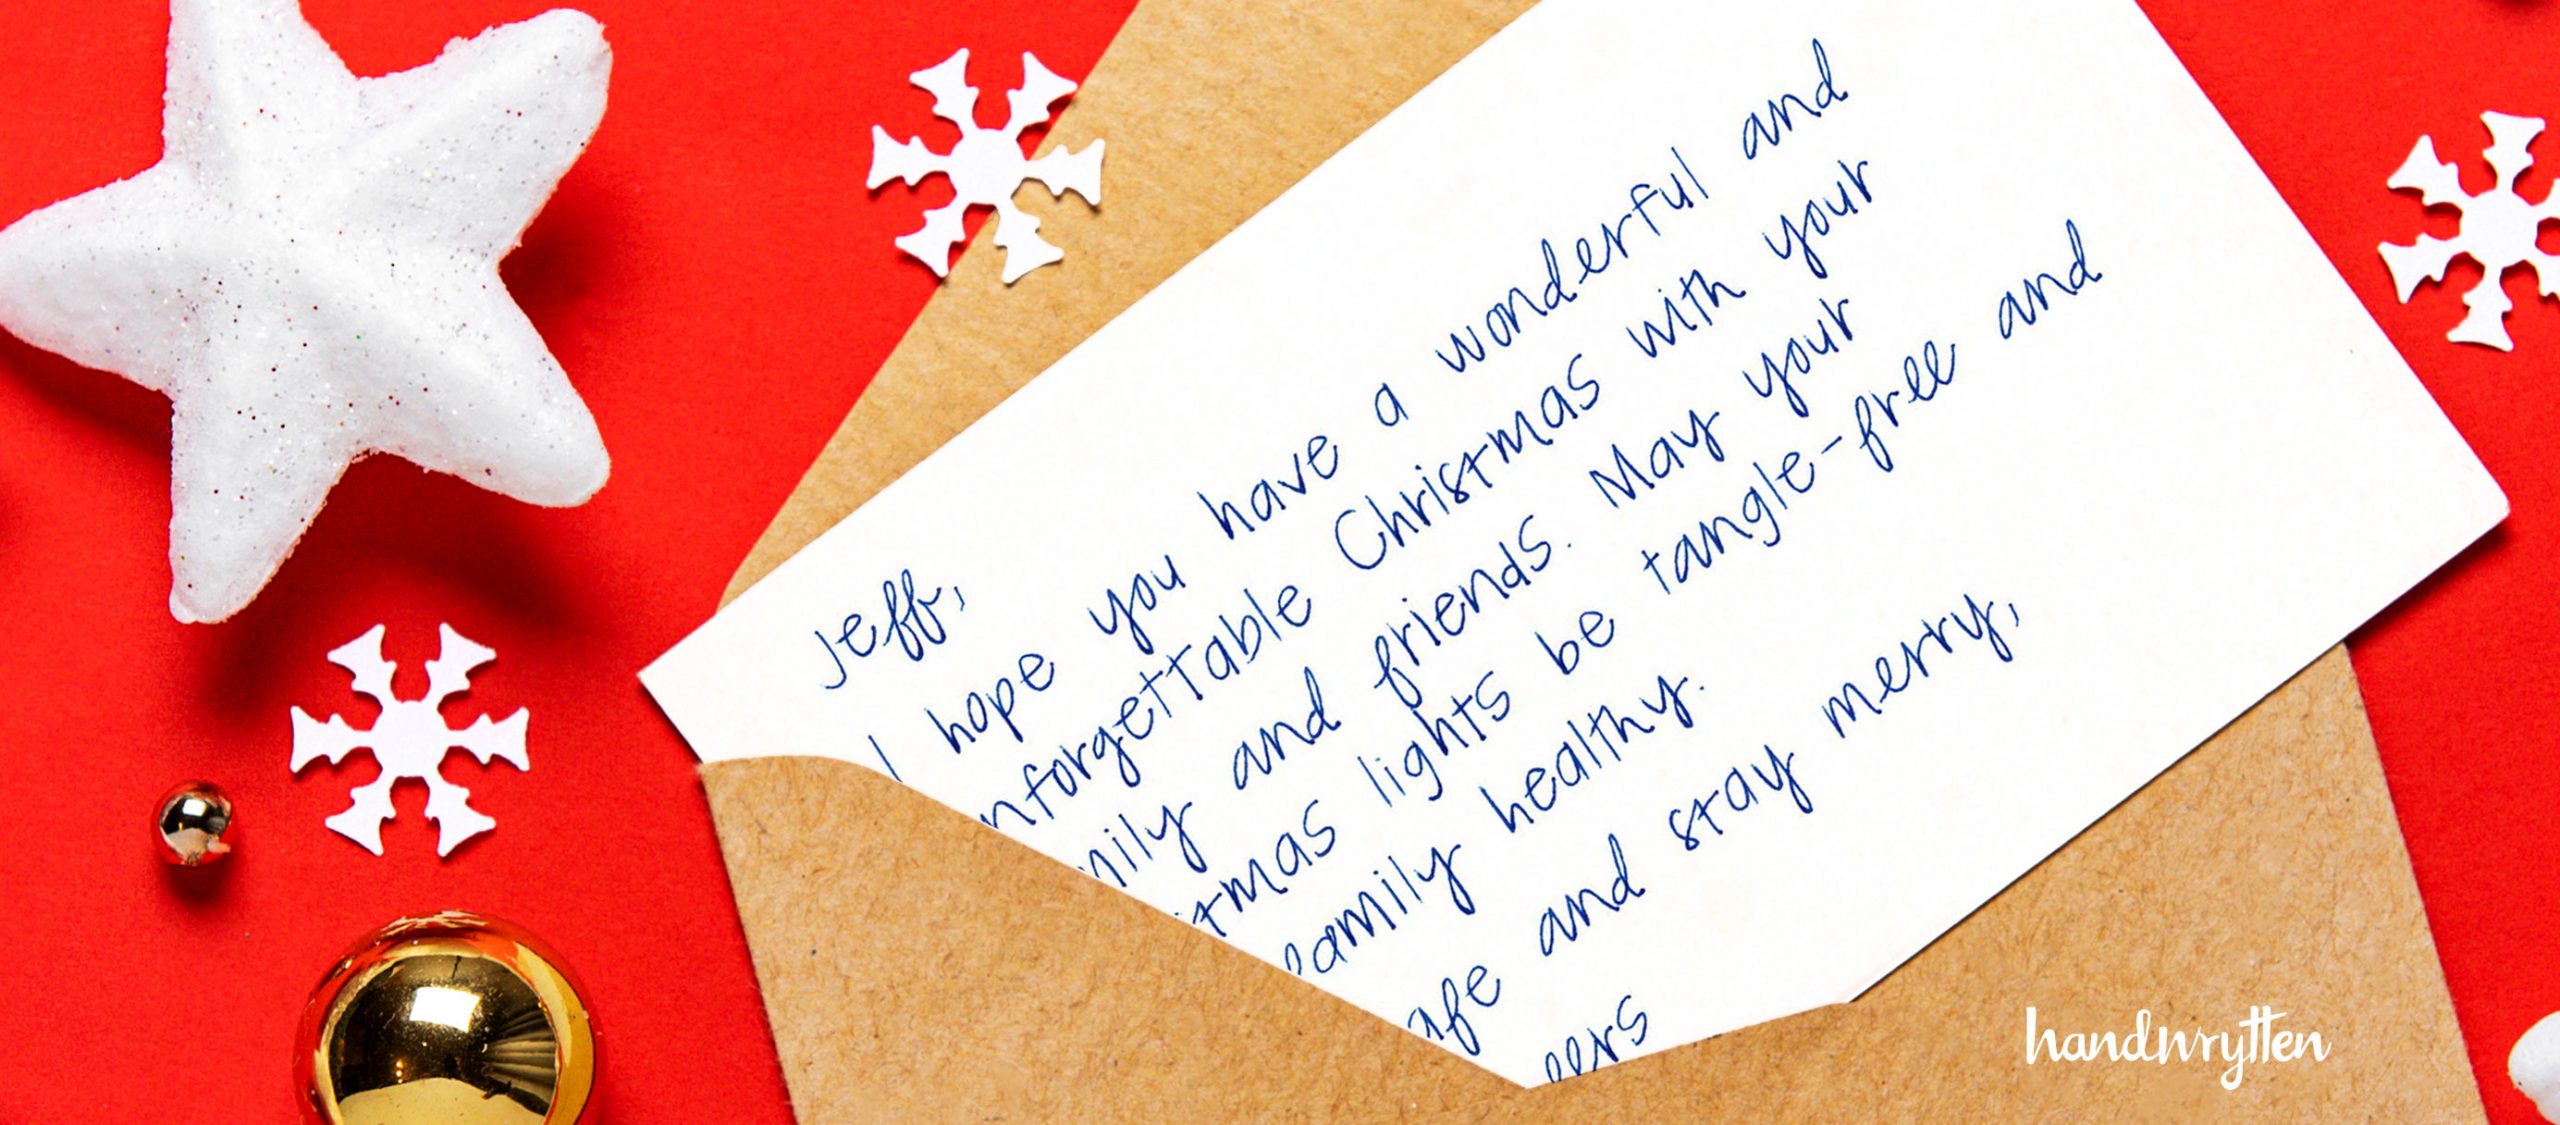 handwritten holiday card from business